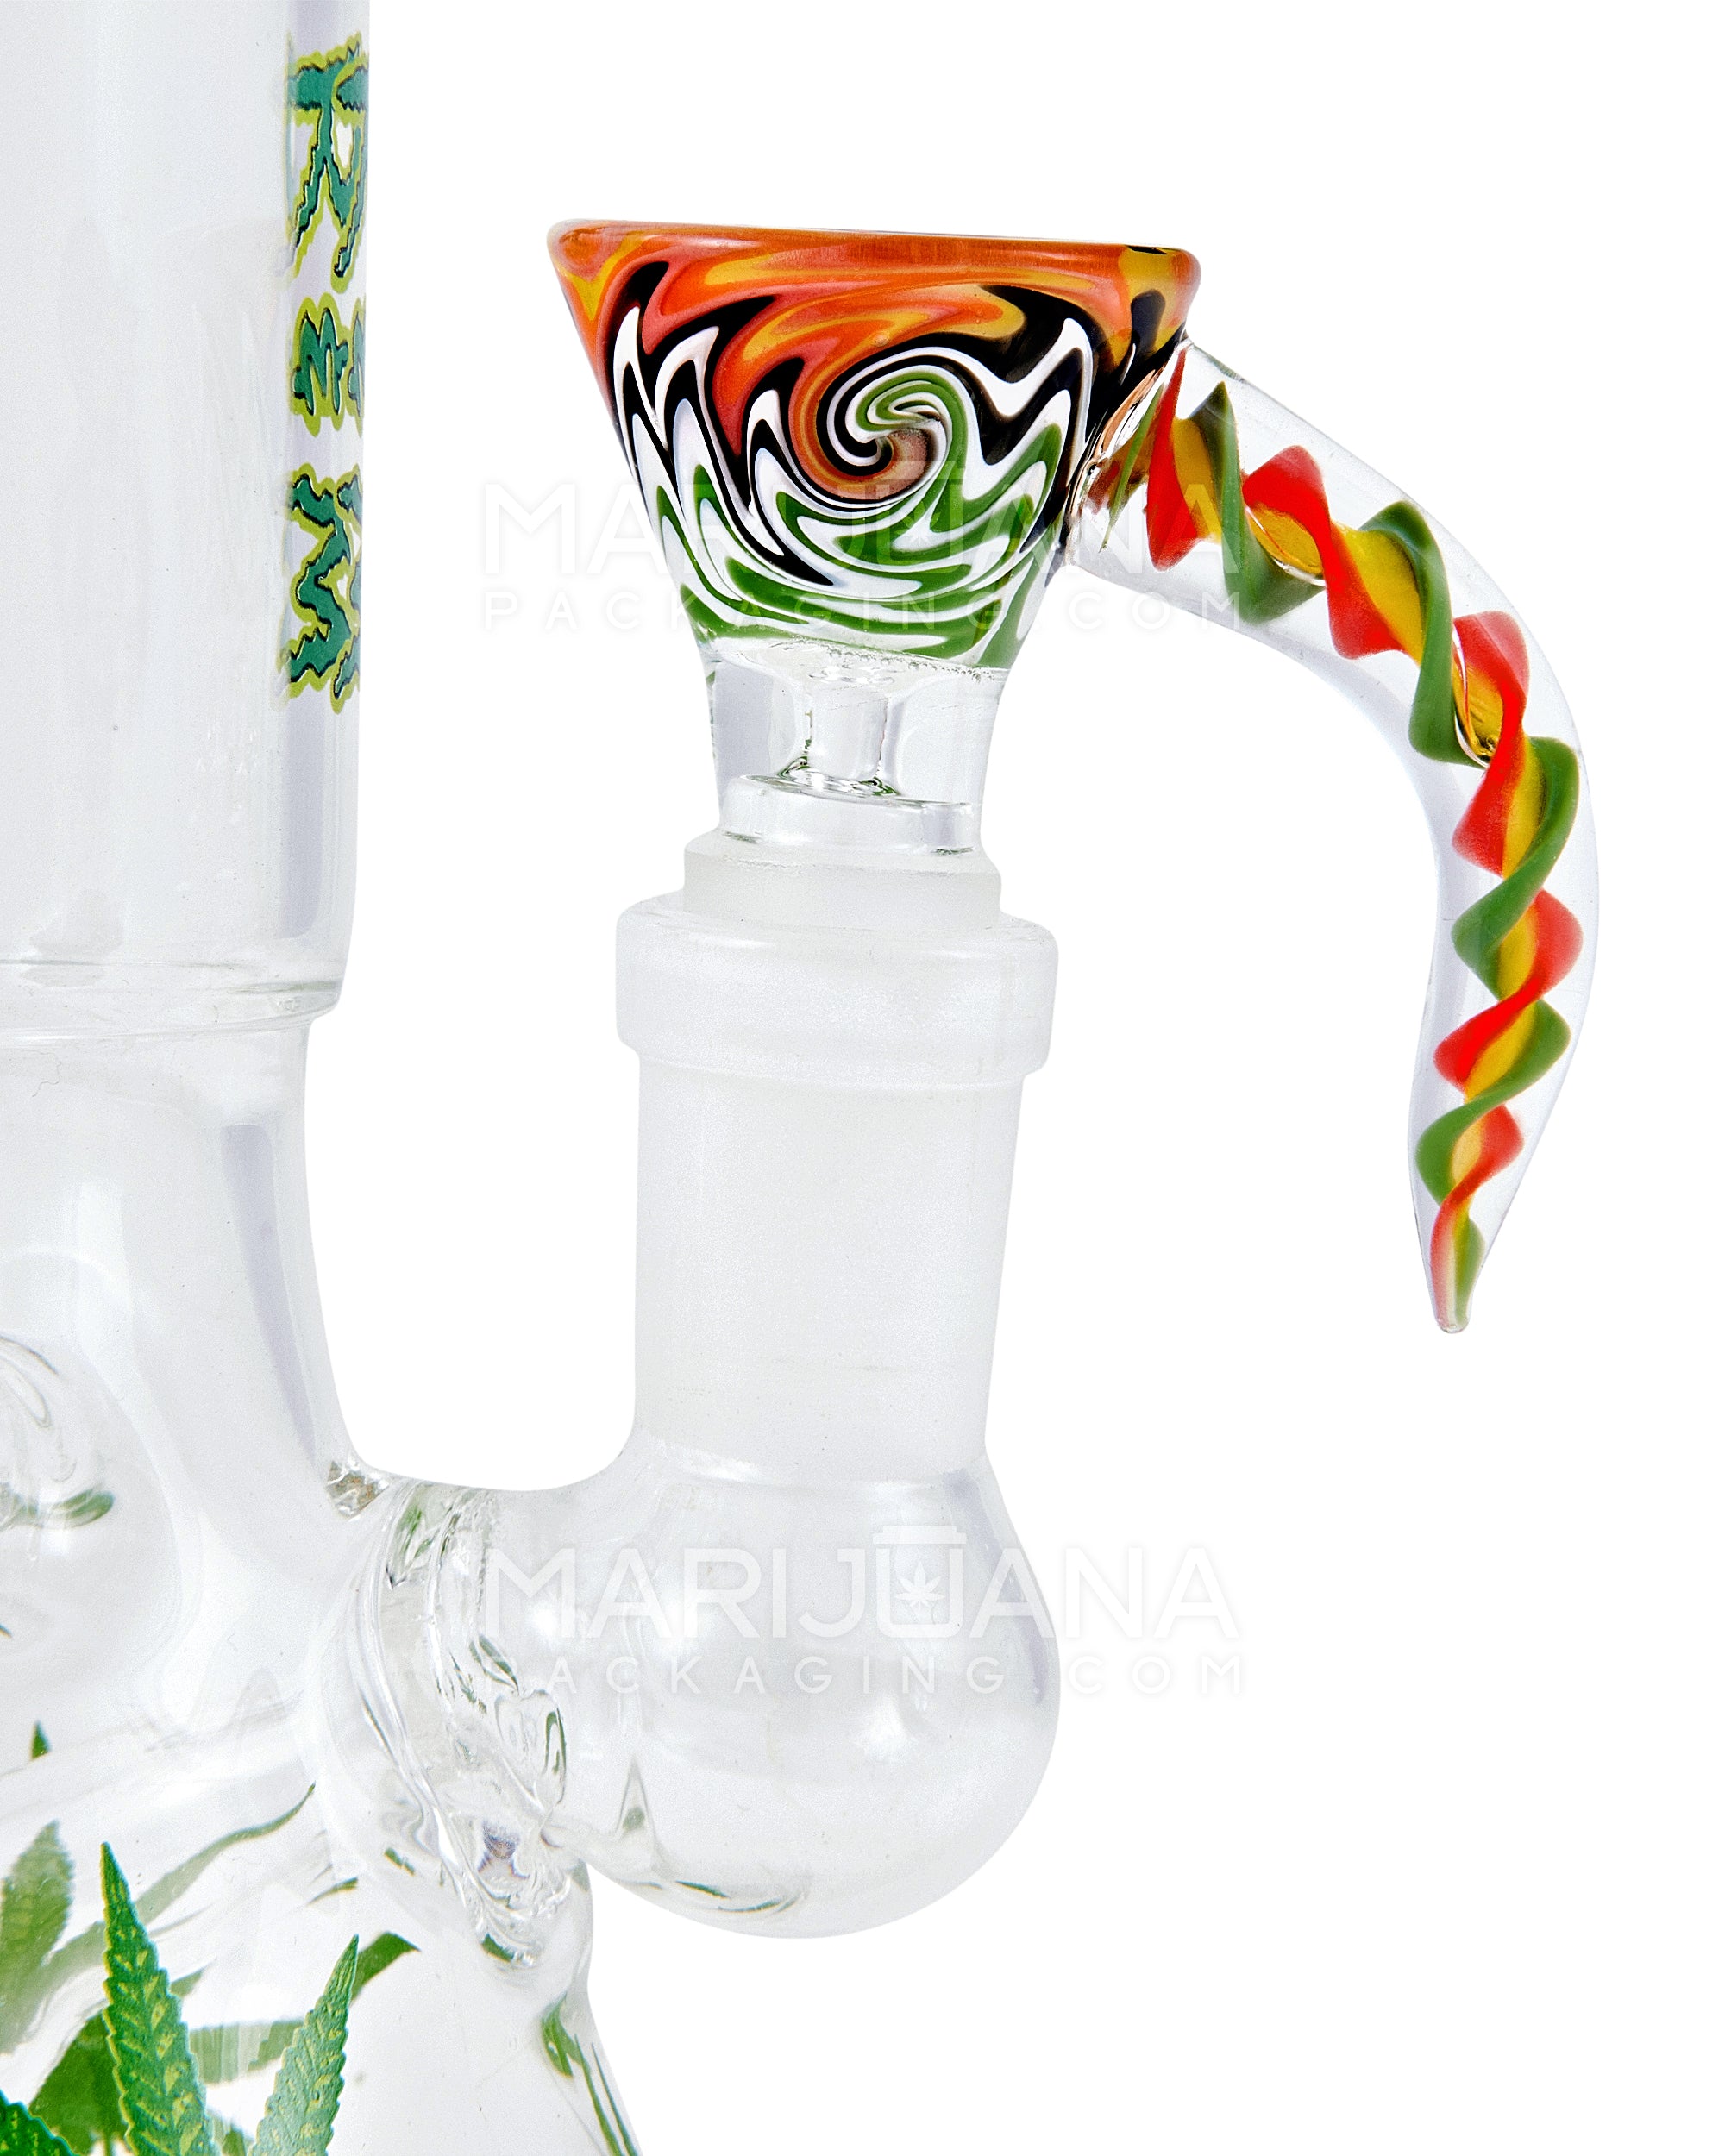 Wig Wag Bowl w/ Spiral Horn Handle | Glass - 14mm - Assorted - 4